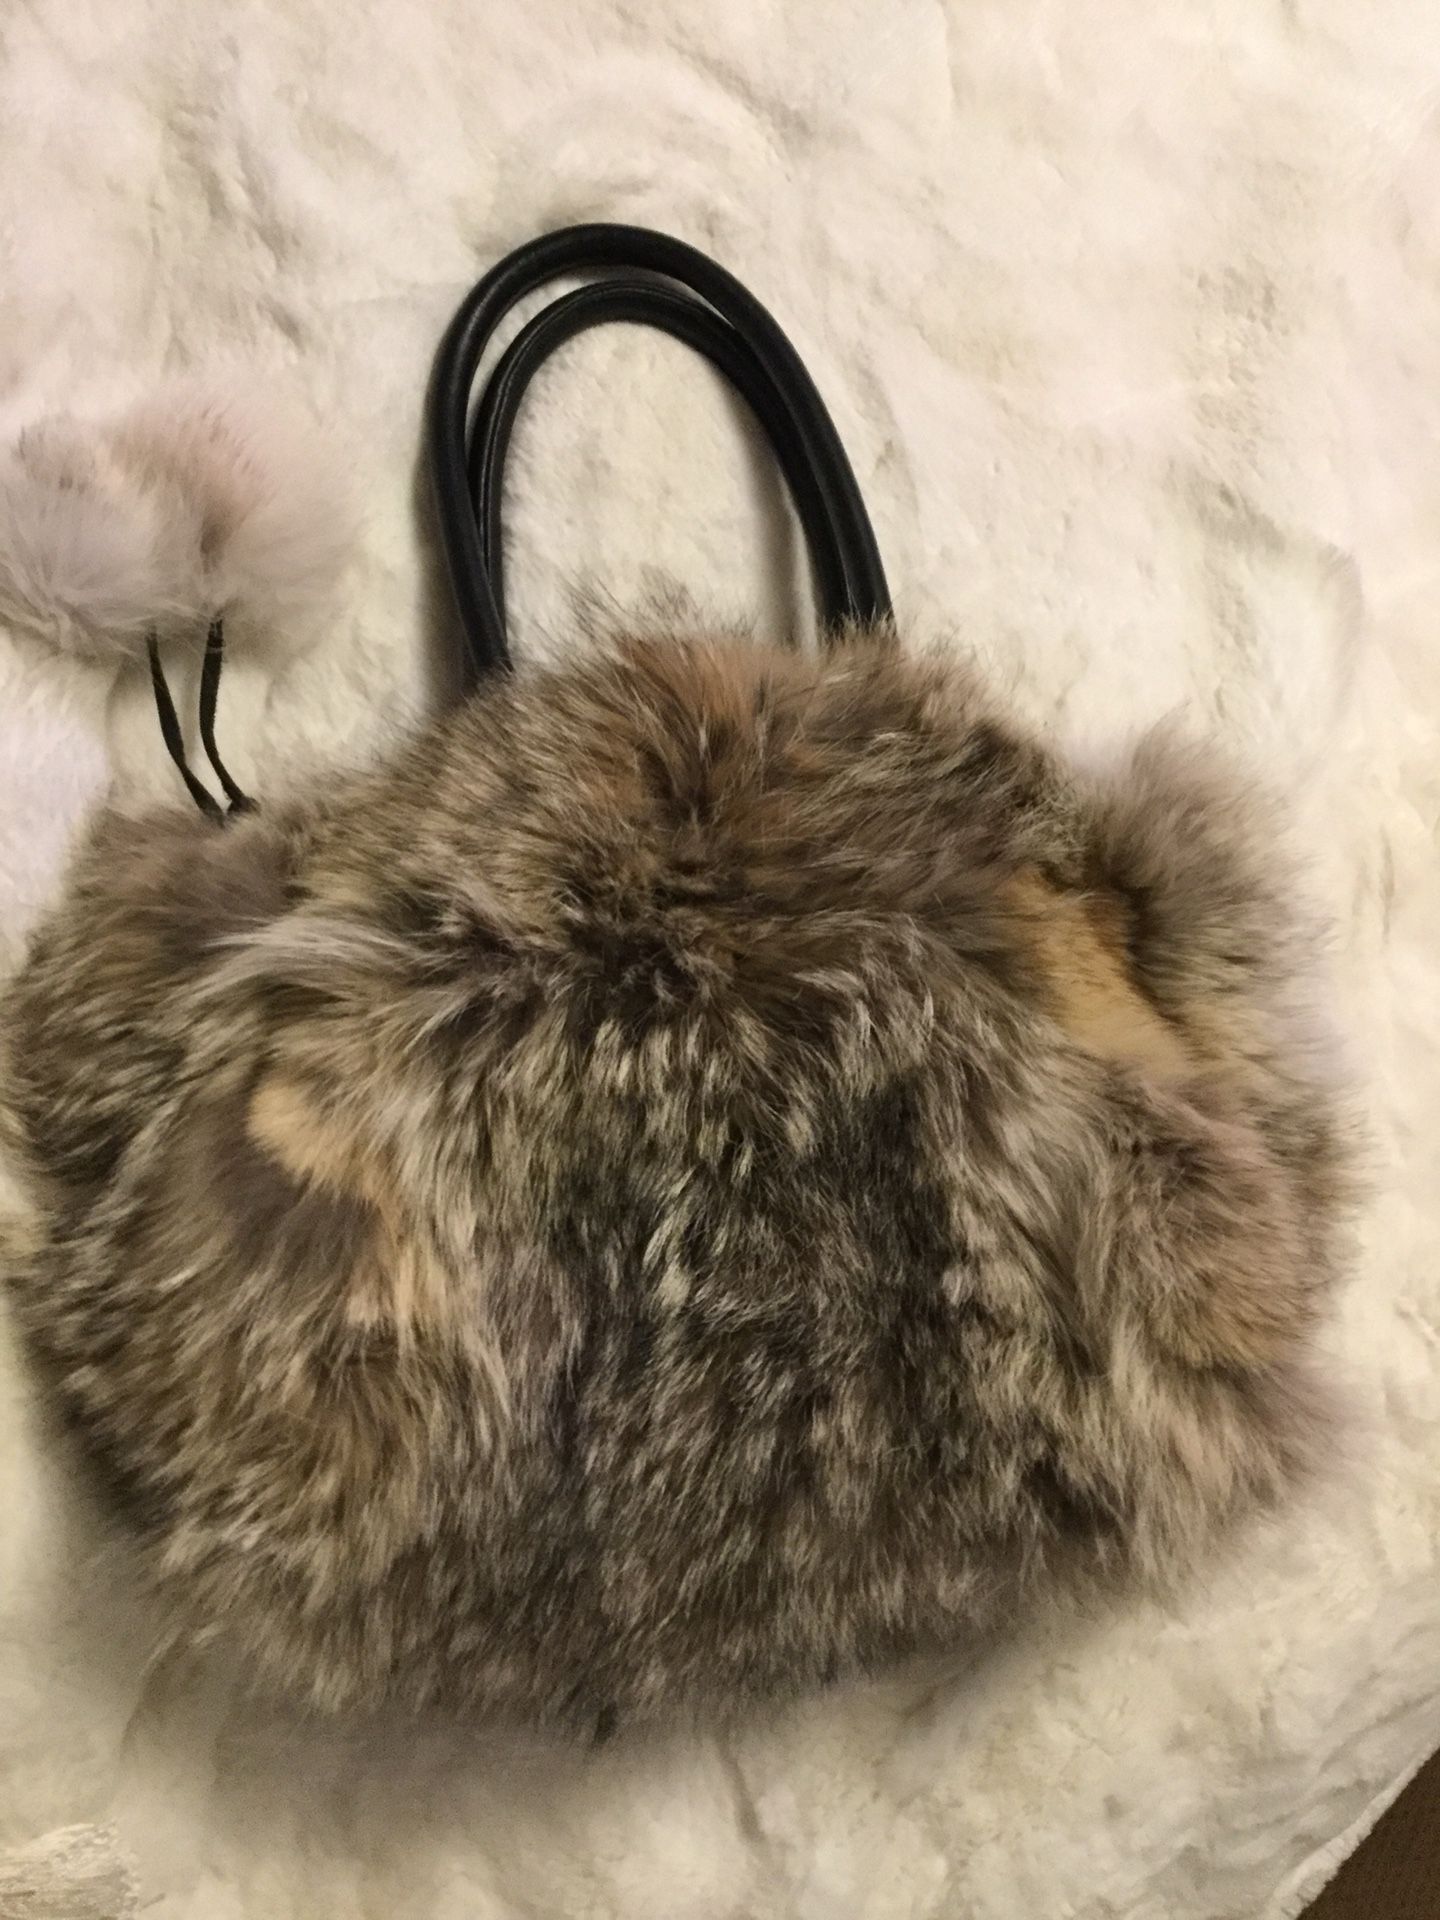 Coyote fur purse with Pom poms and soft black leather so soft